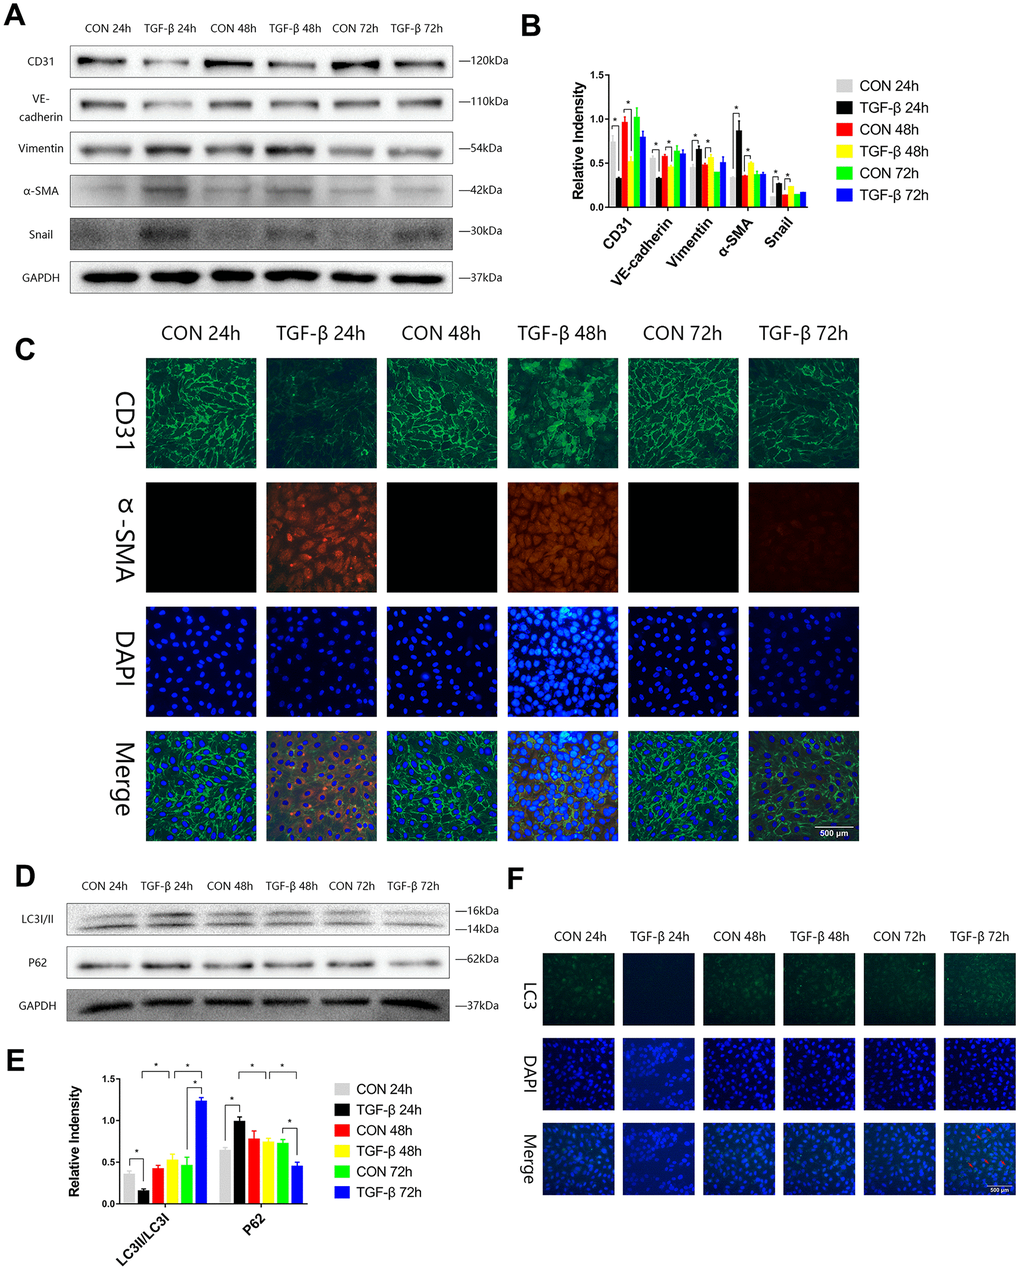 The autophagy level was changed during TGF-β-induced EndMT. (A, B) HUVECs were exposed to TGF-β (20 ng/ml) for 24, 48 and 72 h. Endothelial and mesenchymal markers were assessed using antibodies against CD31, VE-cadherin, Vimentin, α-SMA and Snail via Western blot. (C) Representative images (Scale bars= 500 μm) of immunofluorescence after staining of CD31 and α-SMA 24, 48 and 72 h after TGF-β stimulation. (D, E) Immunoblots were probed for autophagy markers LC3-II/LC3-I and p62 of cell lysates harvested from HUVECs treated with TGF-β for 24, 48 and 72 h. (F) Representative fluorescence microphotographs (Scale bars= 500 μm) of HUVECs immunostained for LC3. Bar graphs represent data that were from three independent experiments, and data represent the means±SEM. Unpaired T test (*P